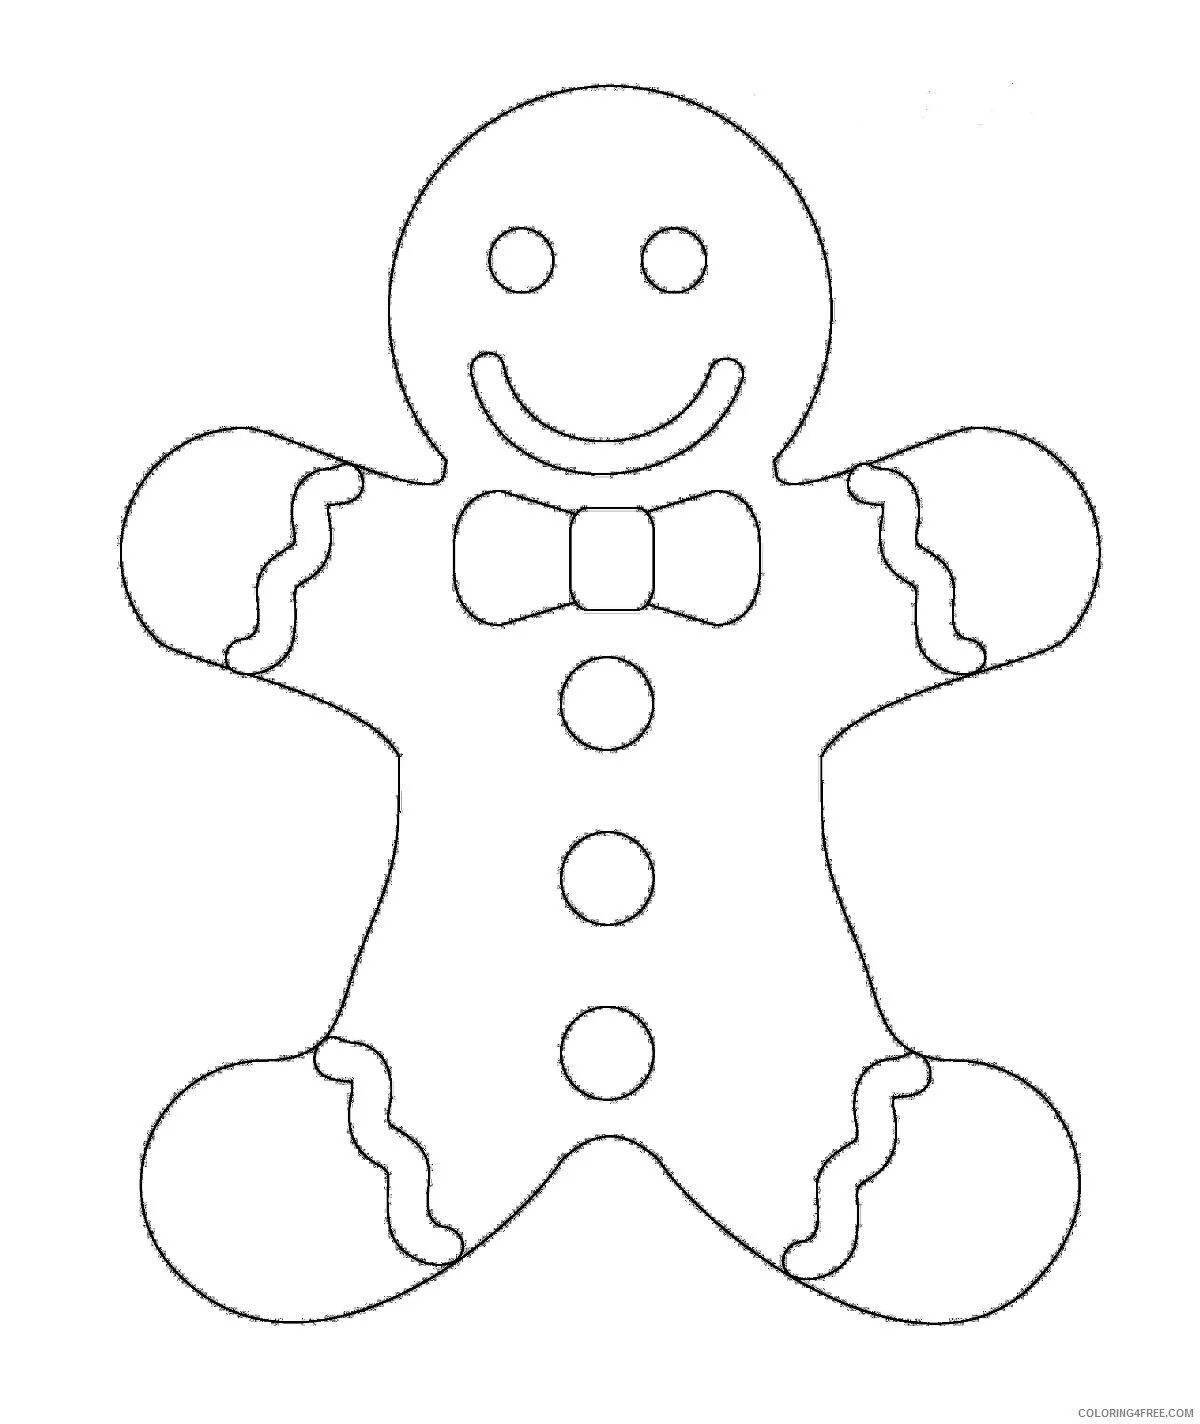 Sweet gingerbread man coloring page